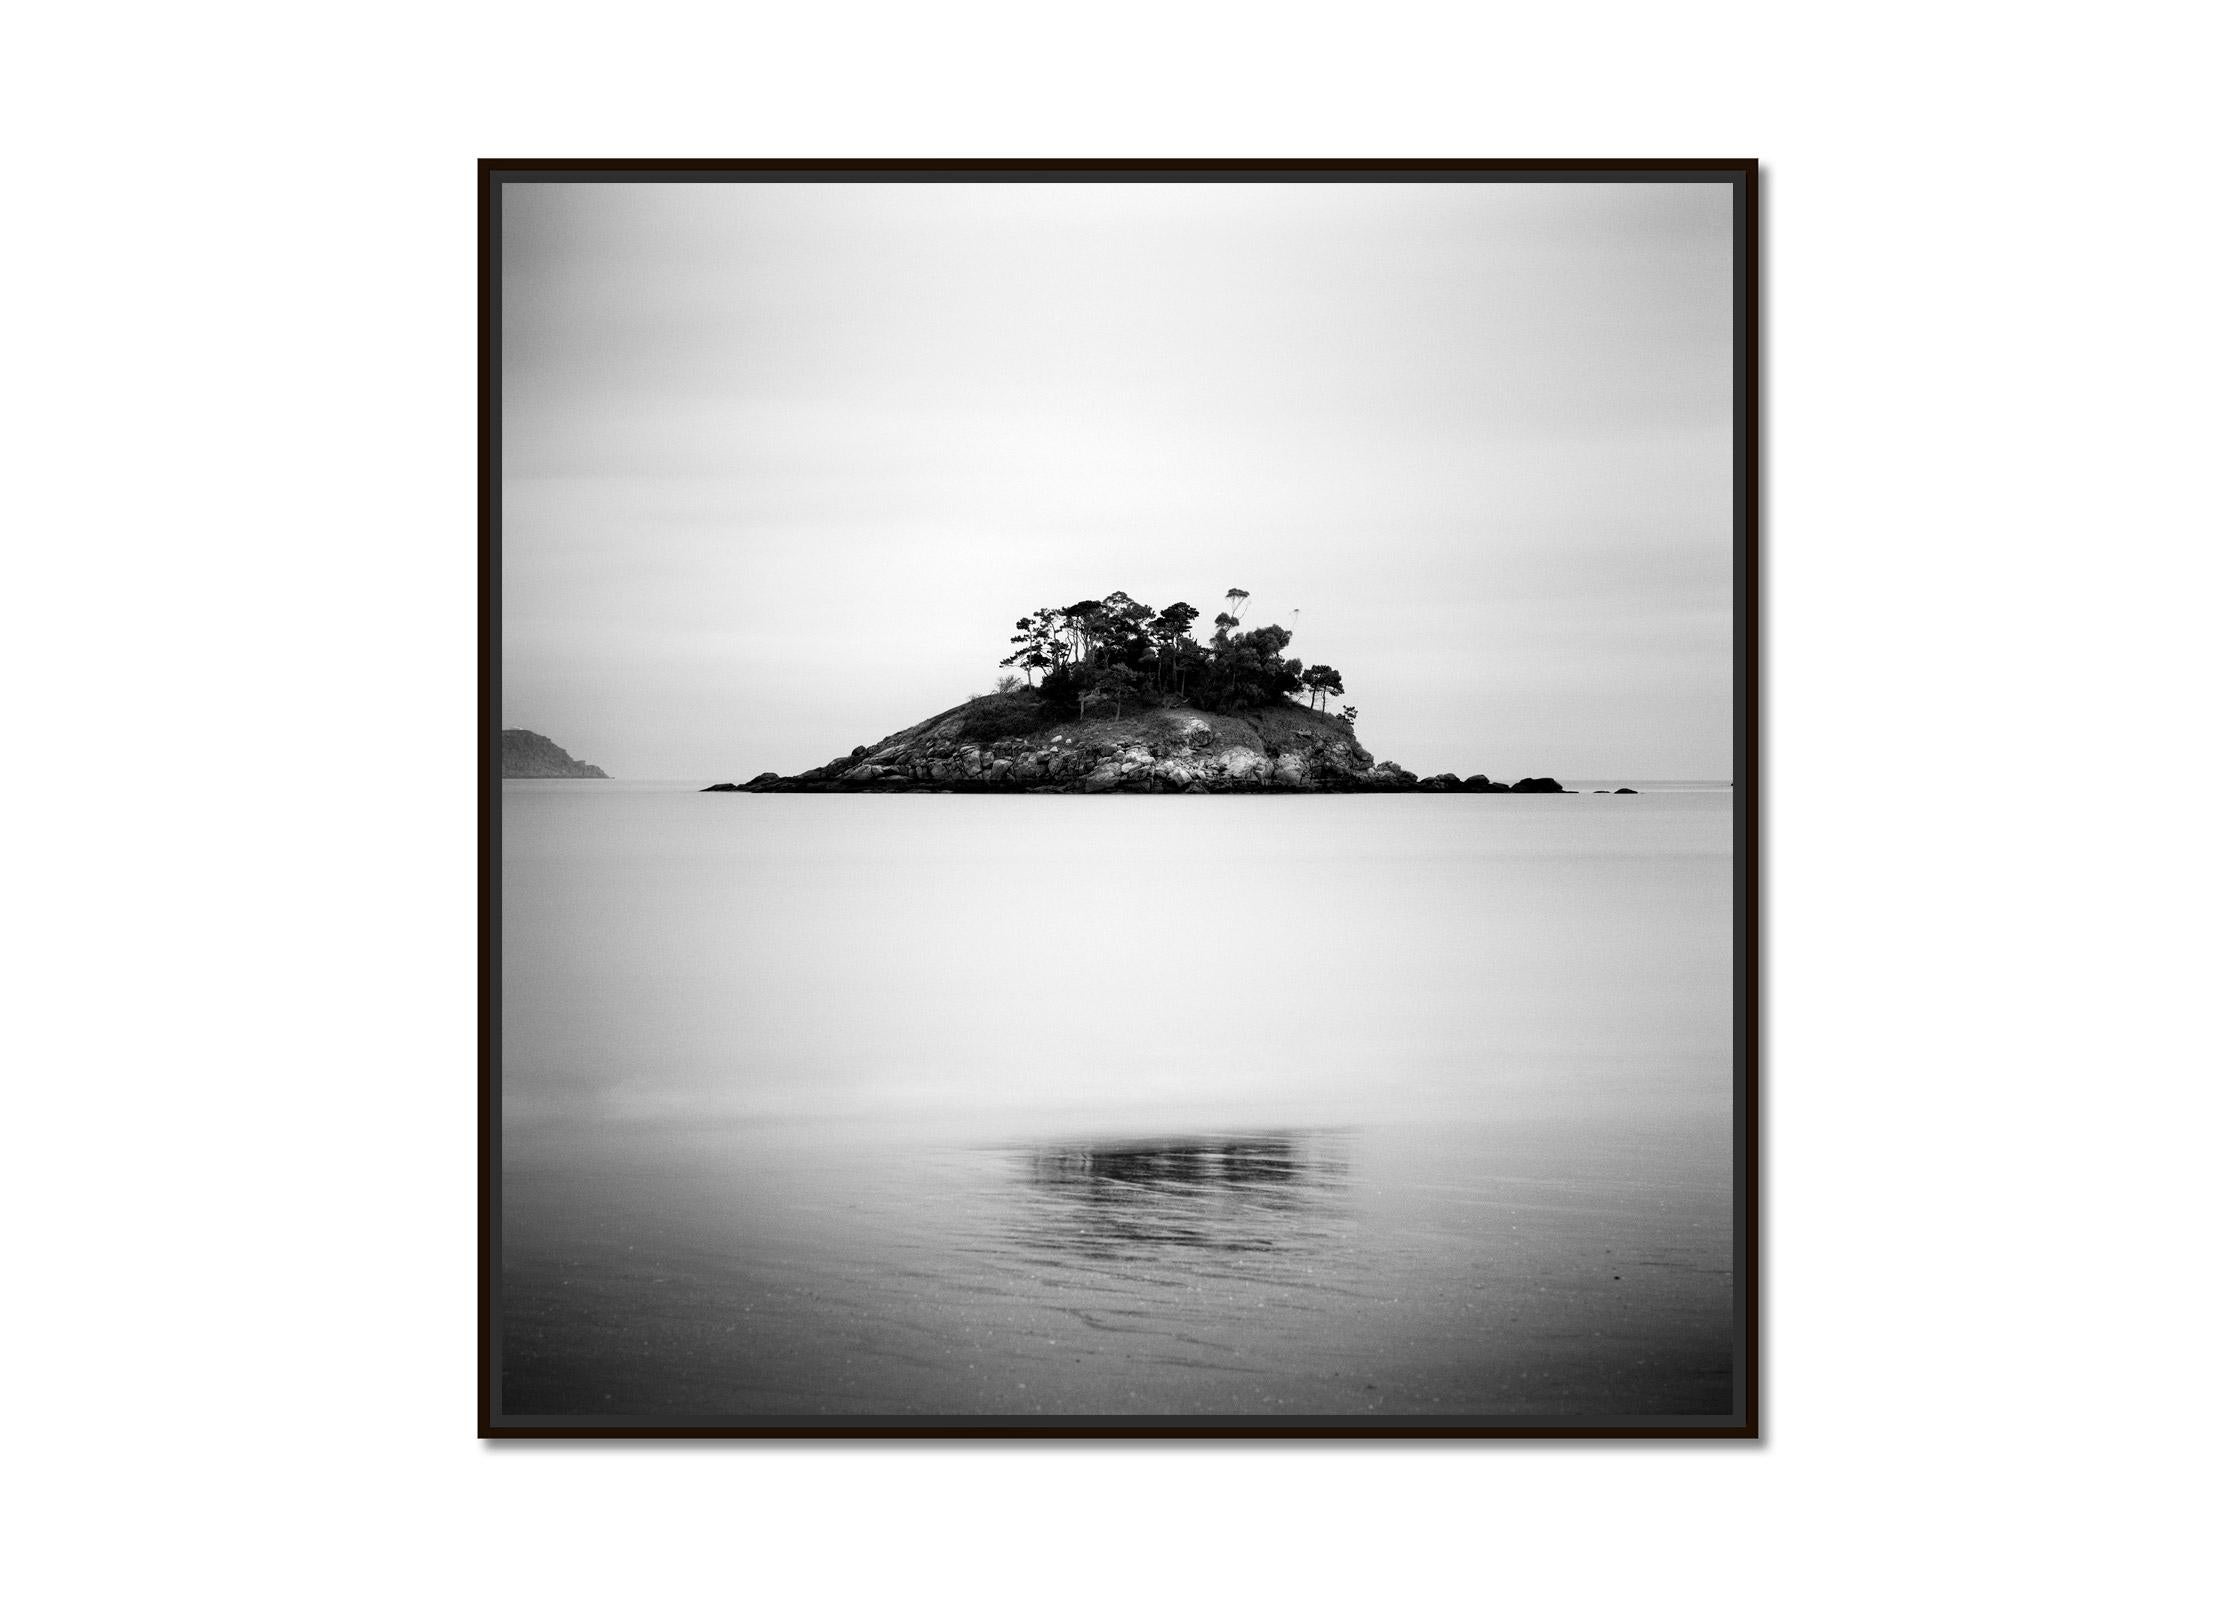 Little Green Island, beach, Spain, black and white fineart landscape photography - Photograph by Gerald Berghammer